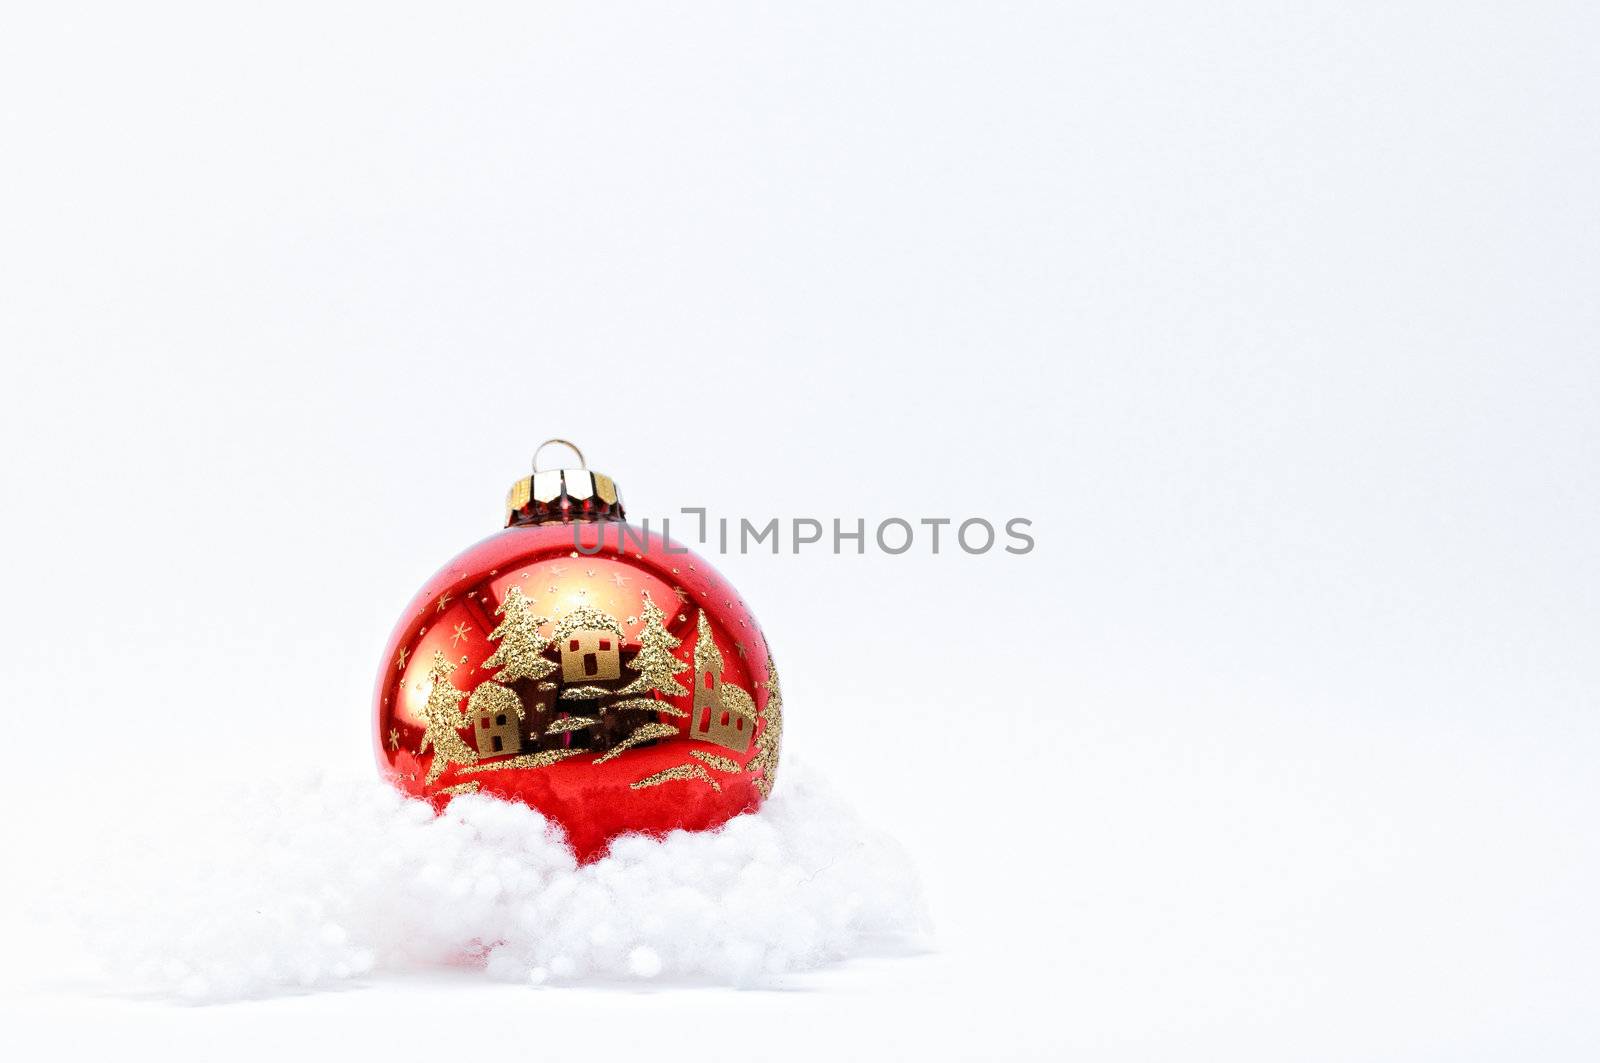 Single red Christmas Bauble with gold glitter on a white background.